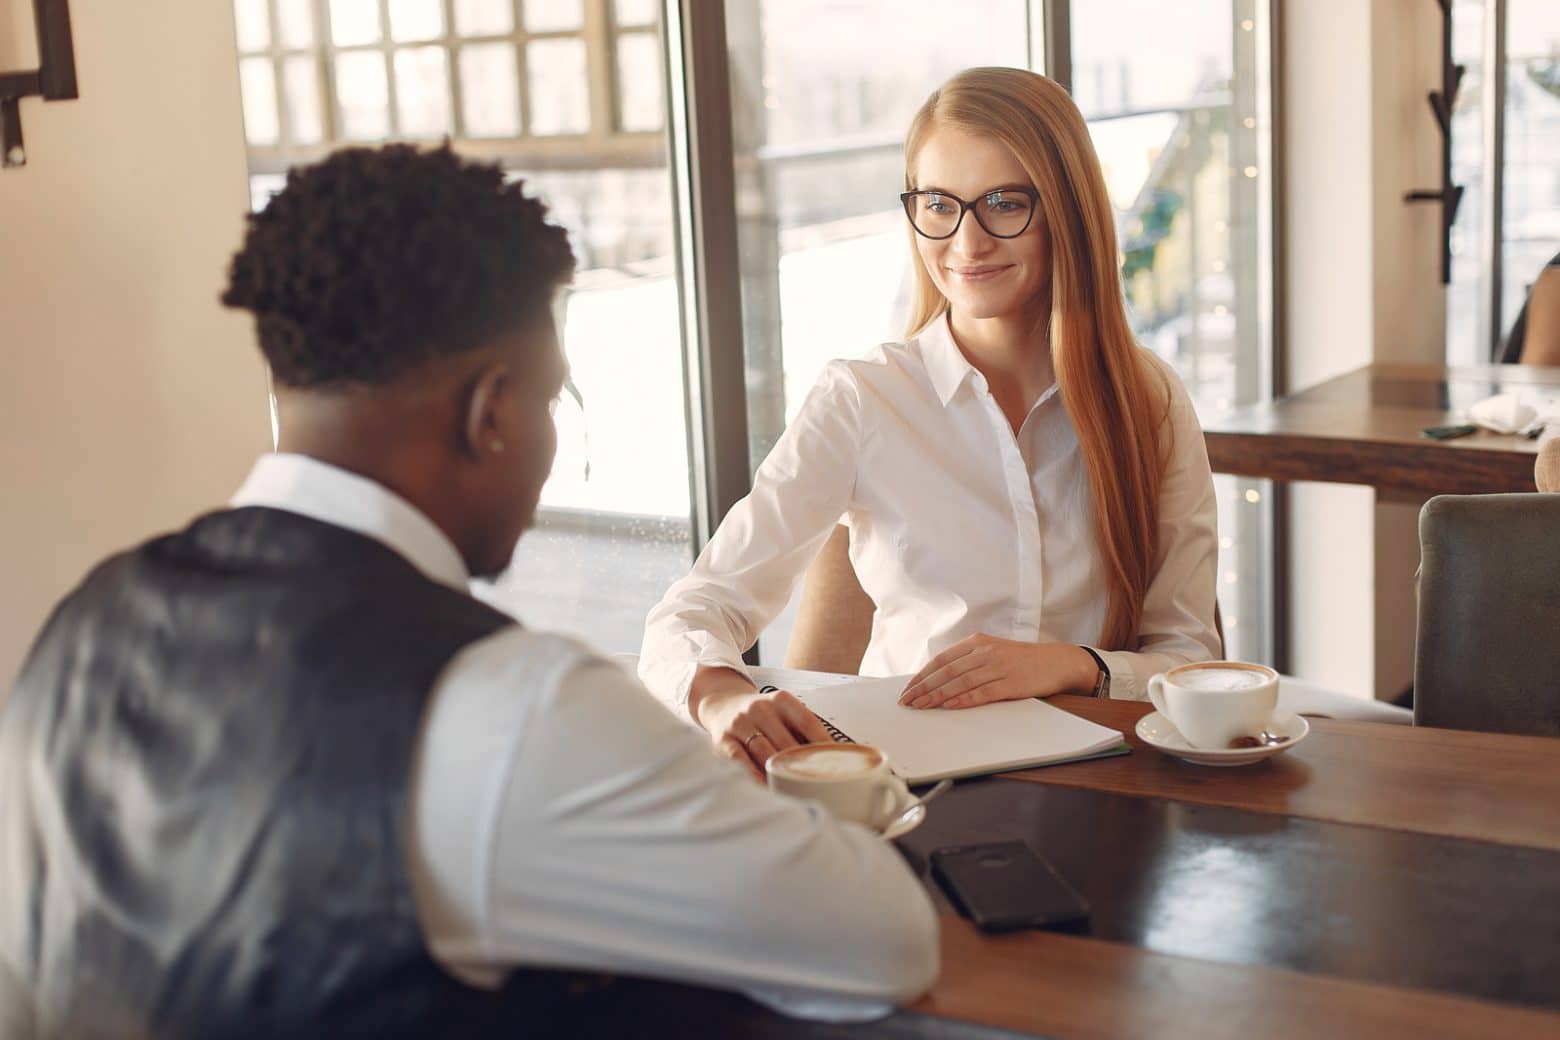 10 most common interview questions and answers in South Africa